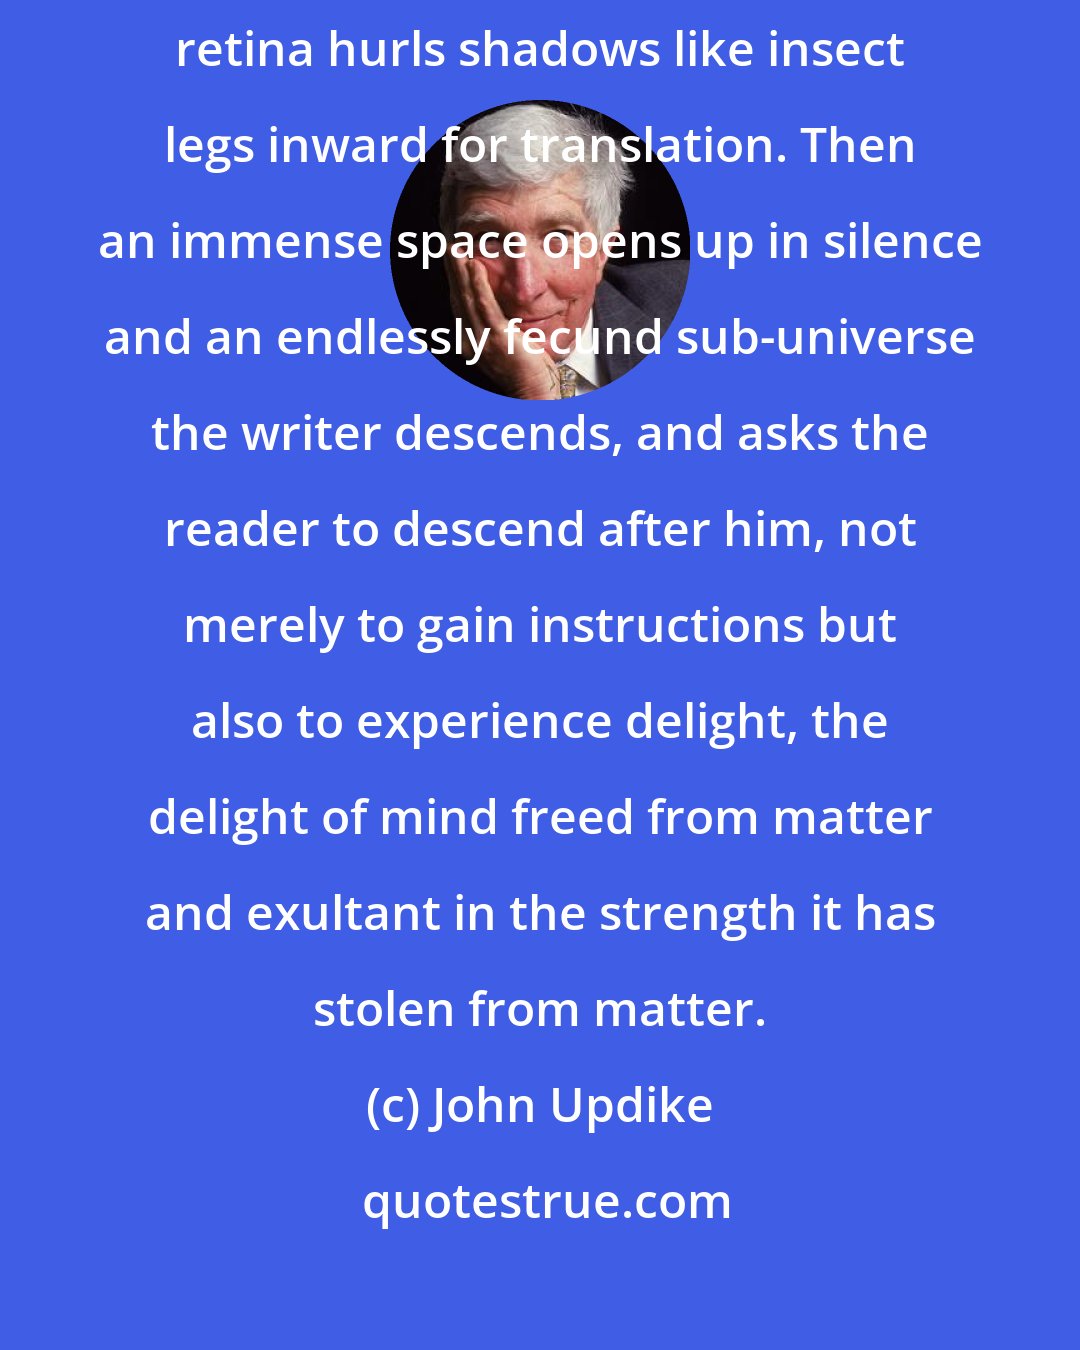 John Updike: It skims in through the eye, and by means of the utterly delicate retina hurls shadows like insect legs inward for translation. Then an immense space opens up in silence and an endlessly fecund sub-universe the writer descends, and asks the reader to descend after him, not merely to gain instructions but also to experience delight, the delight of mind freed from matter and exultant in the strength it has stolen from matter.